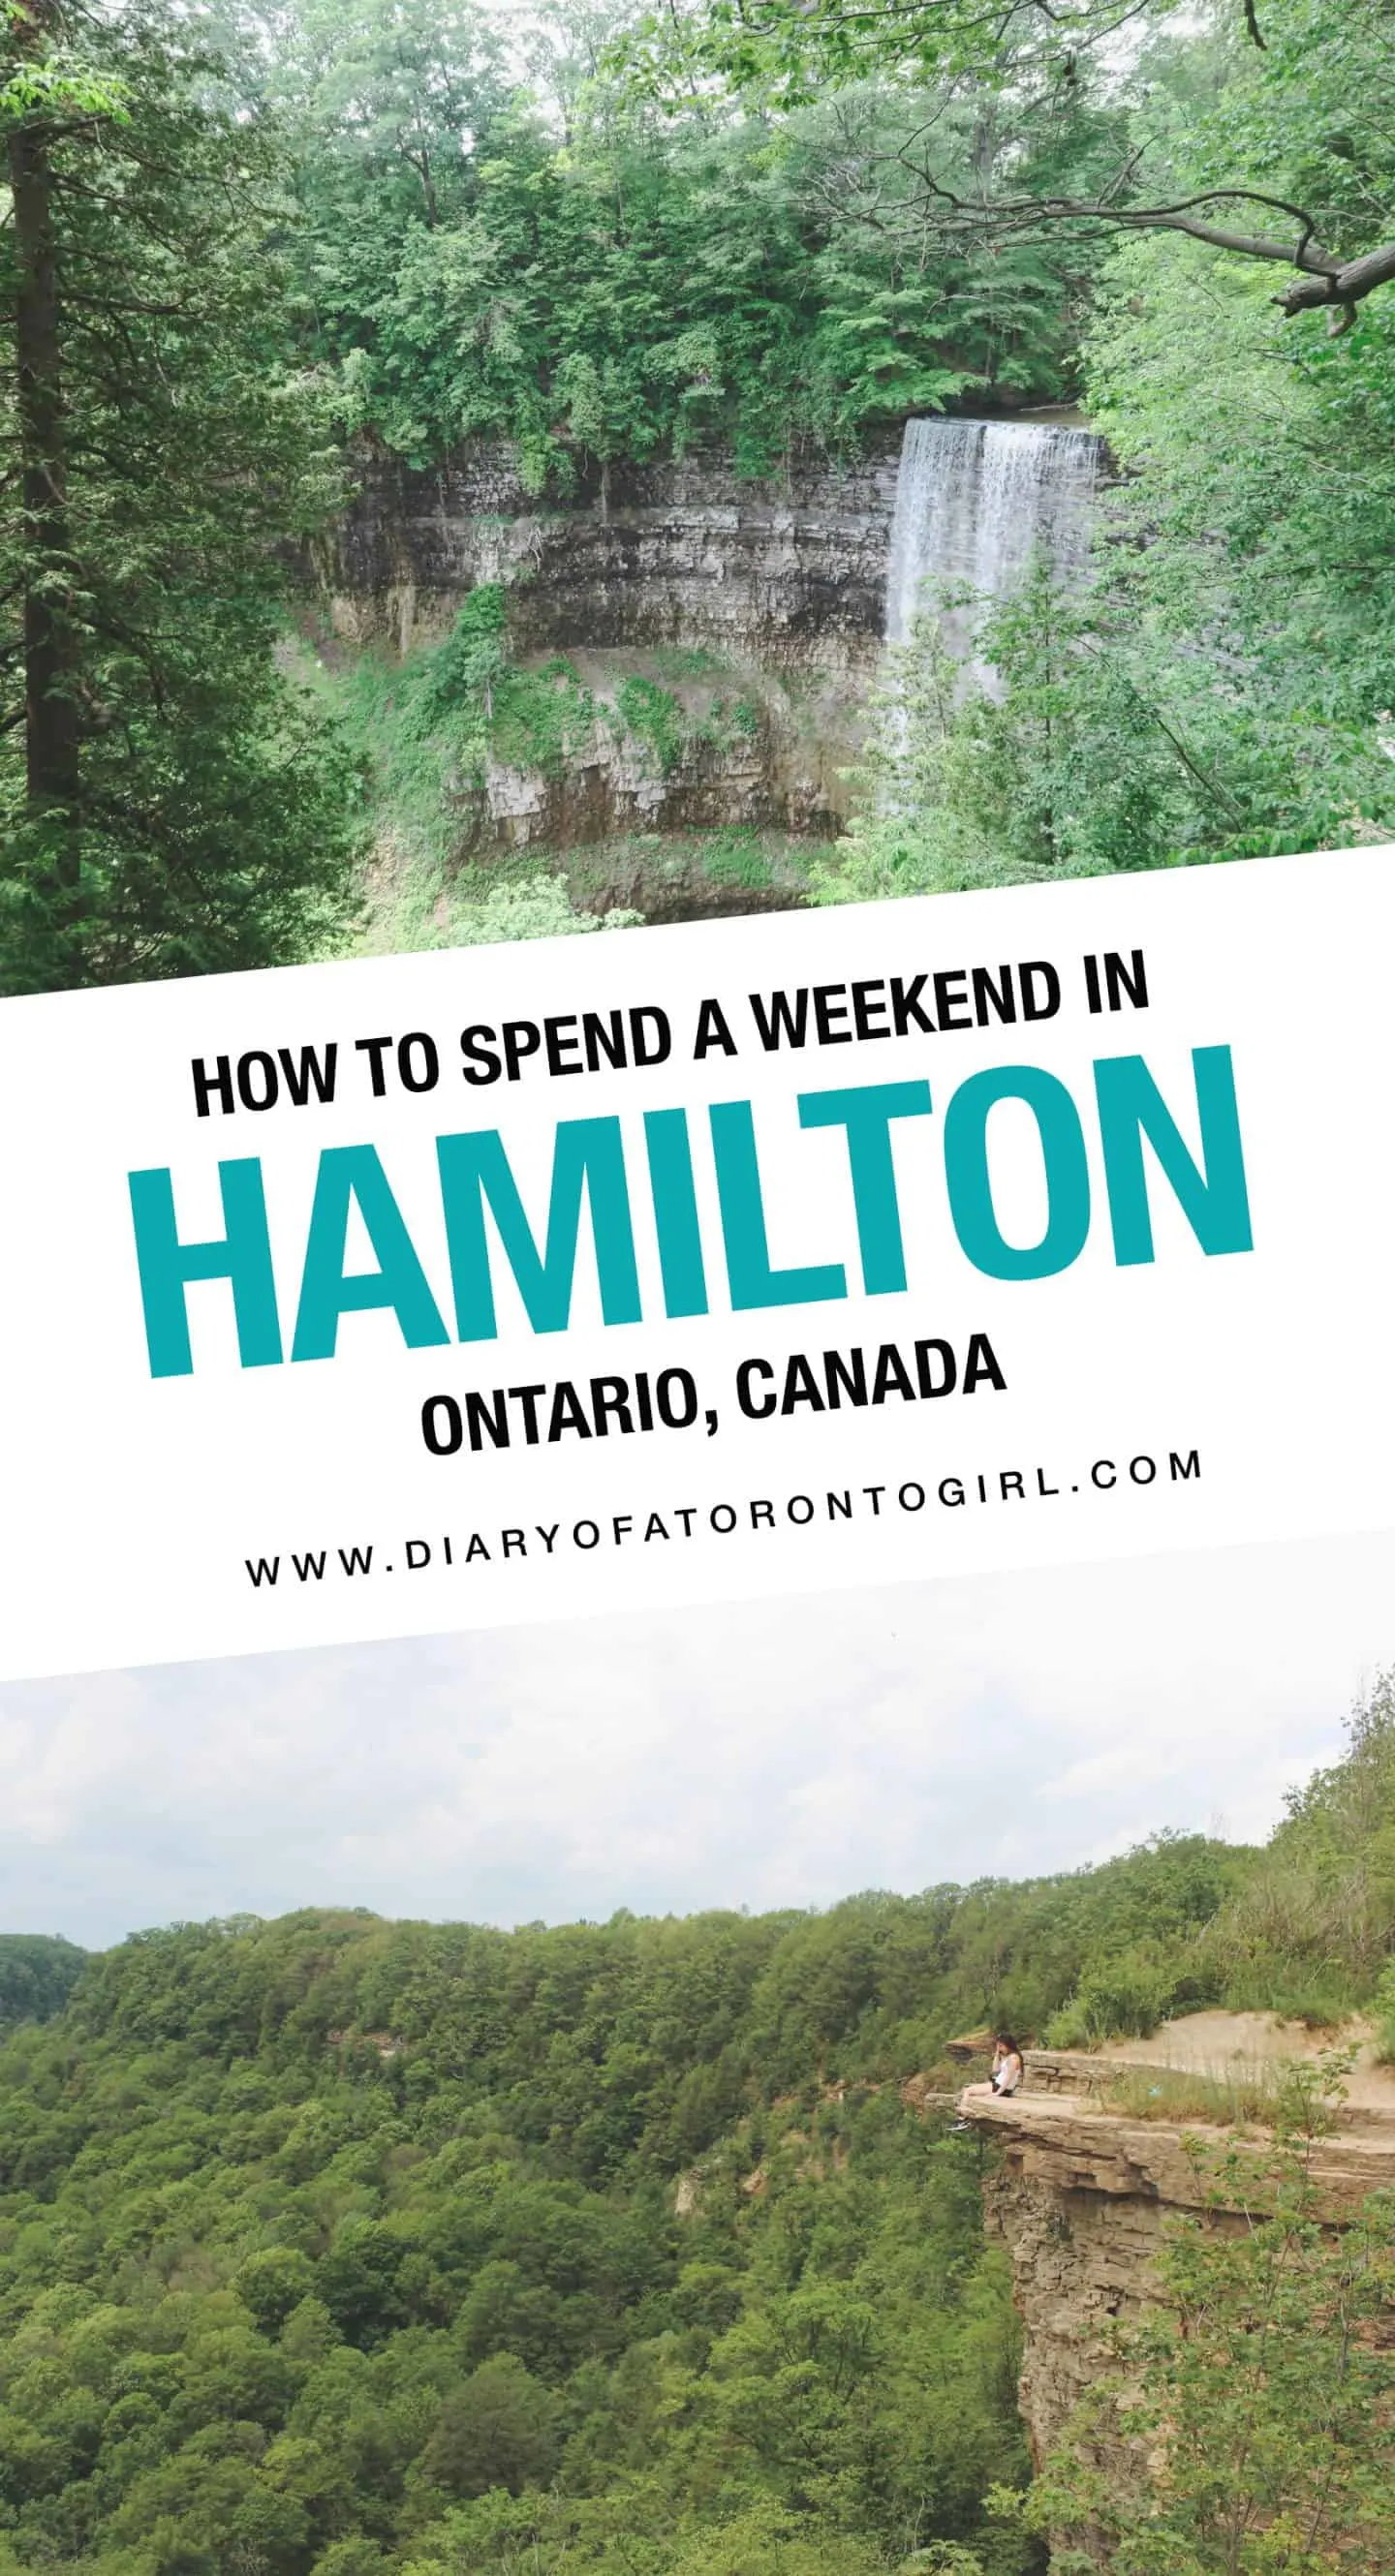 Planning a road trip to Hamilton? Here's how to spend the perfect summer weekend exploring waterfalls and restaurants in Hamilton, Ontario!